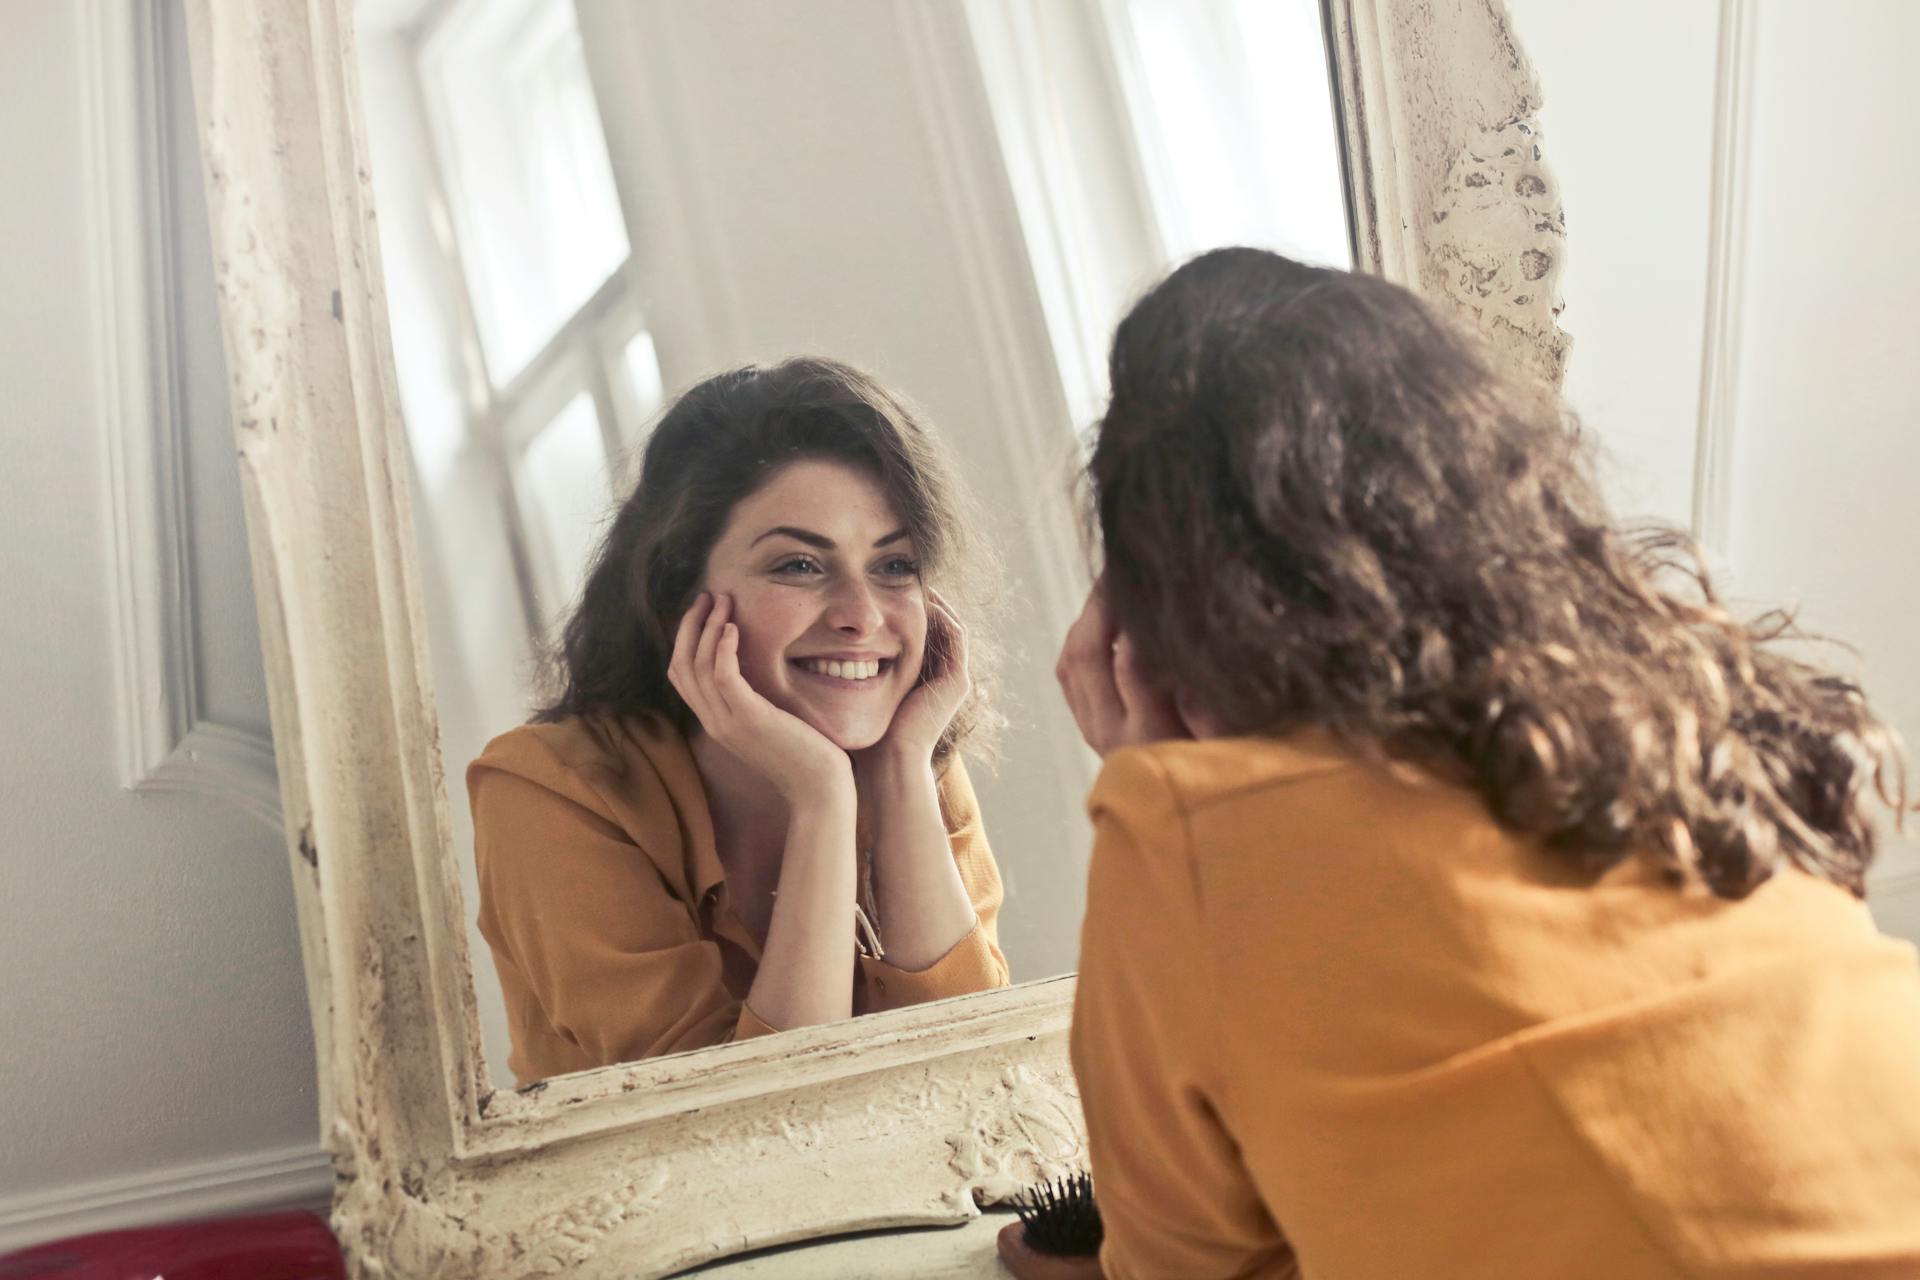 A smiling woman looking at her reflection in the mirror | Source: Pexels